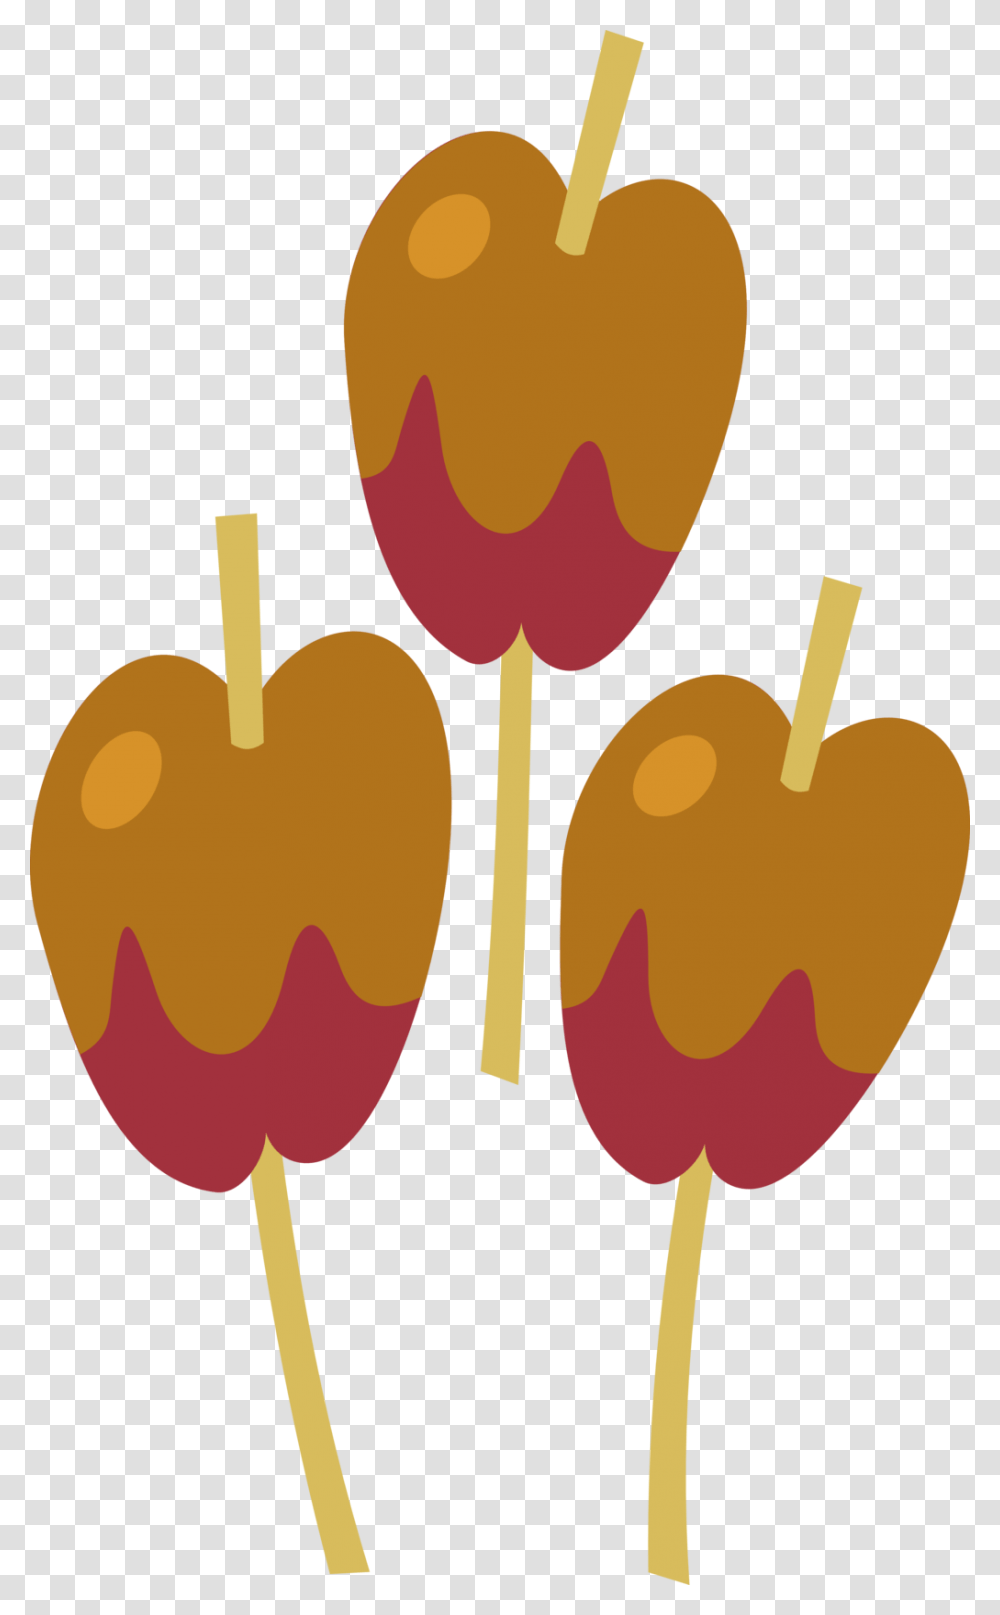 Candy Apple Caramel Apple Cutie Mark, Sweets, Food, Confectionery, Plant Transparent Png